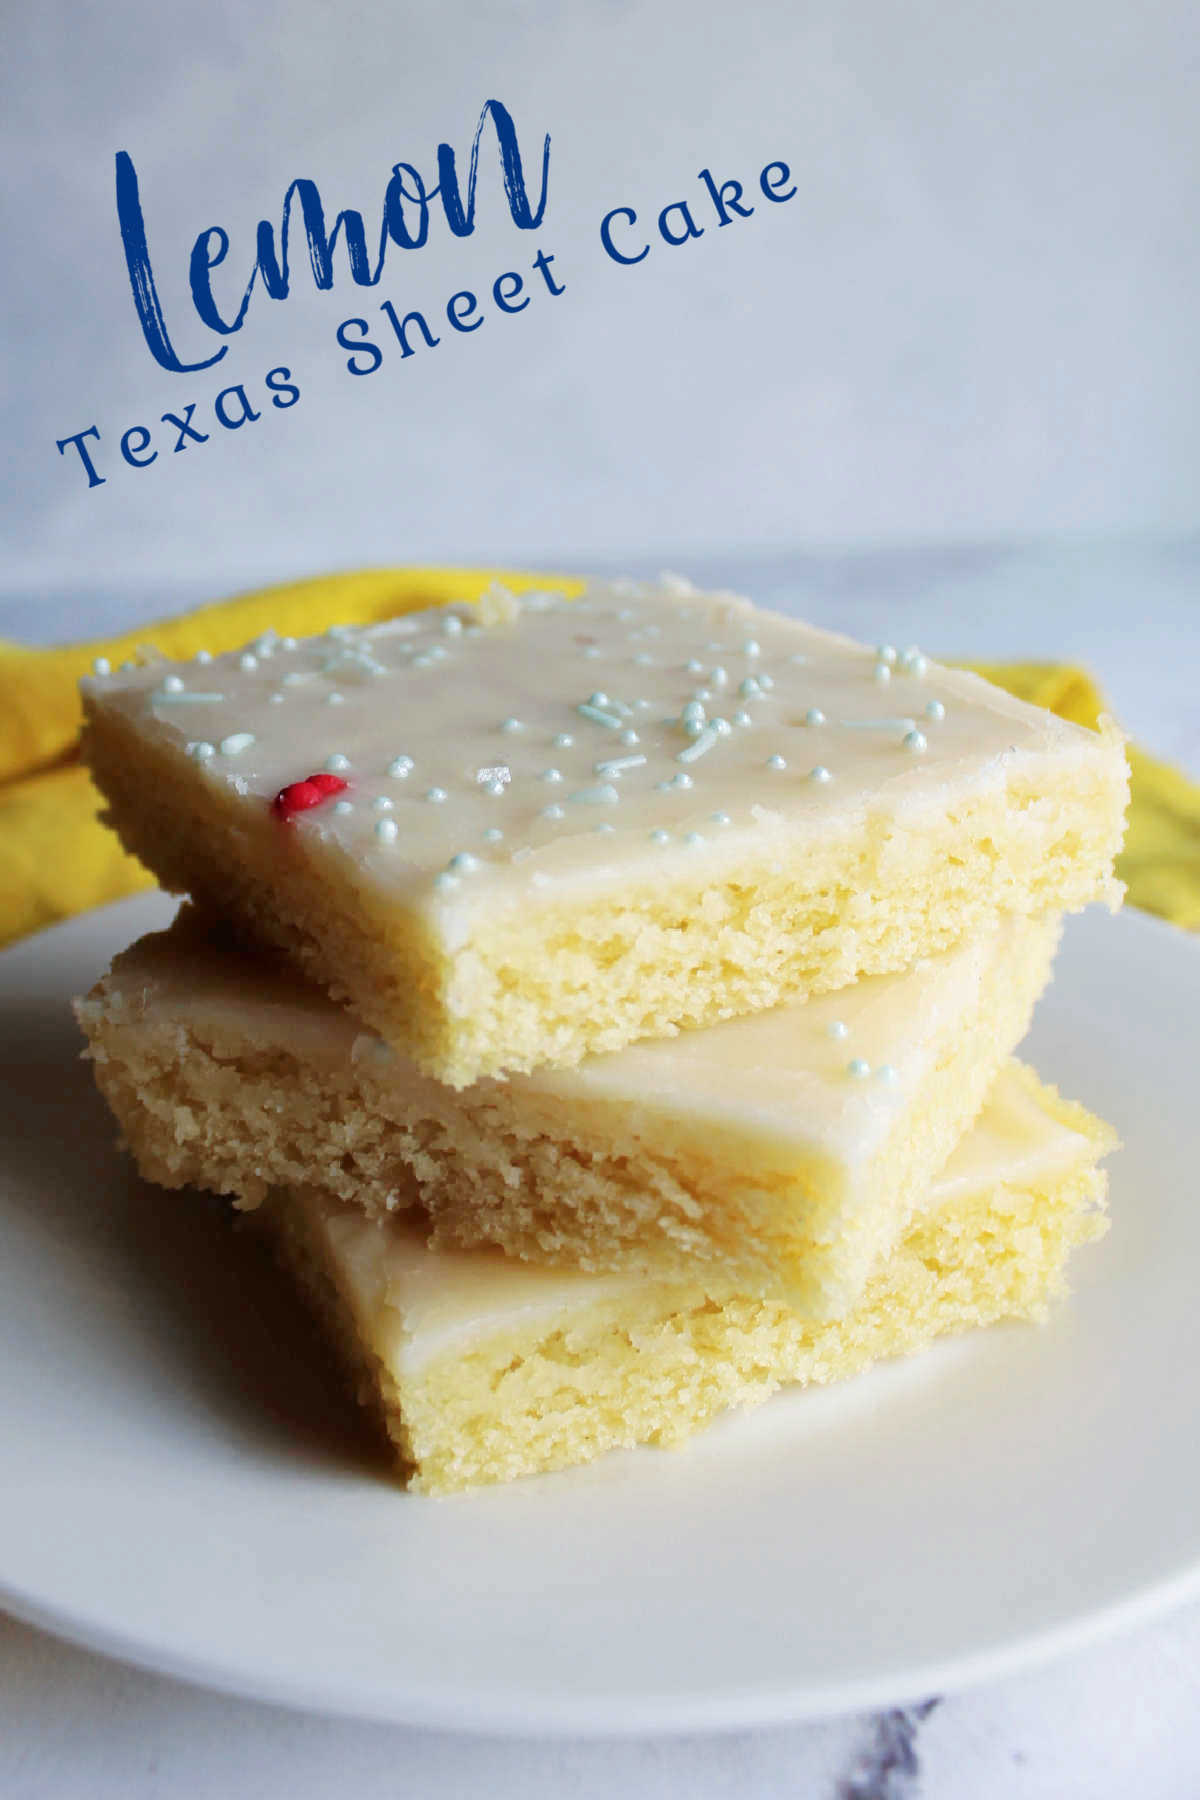 Lemon Texas sheet cake is perfect for feeding a tasty dessert to a crowd.  It is so easy to make and has just the right amount of lemon flavor. Take it to your next BBQ, family reunion or potluck!